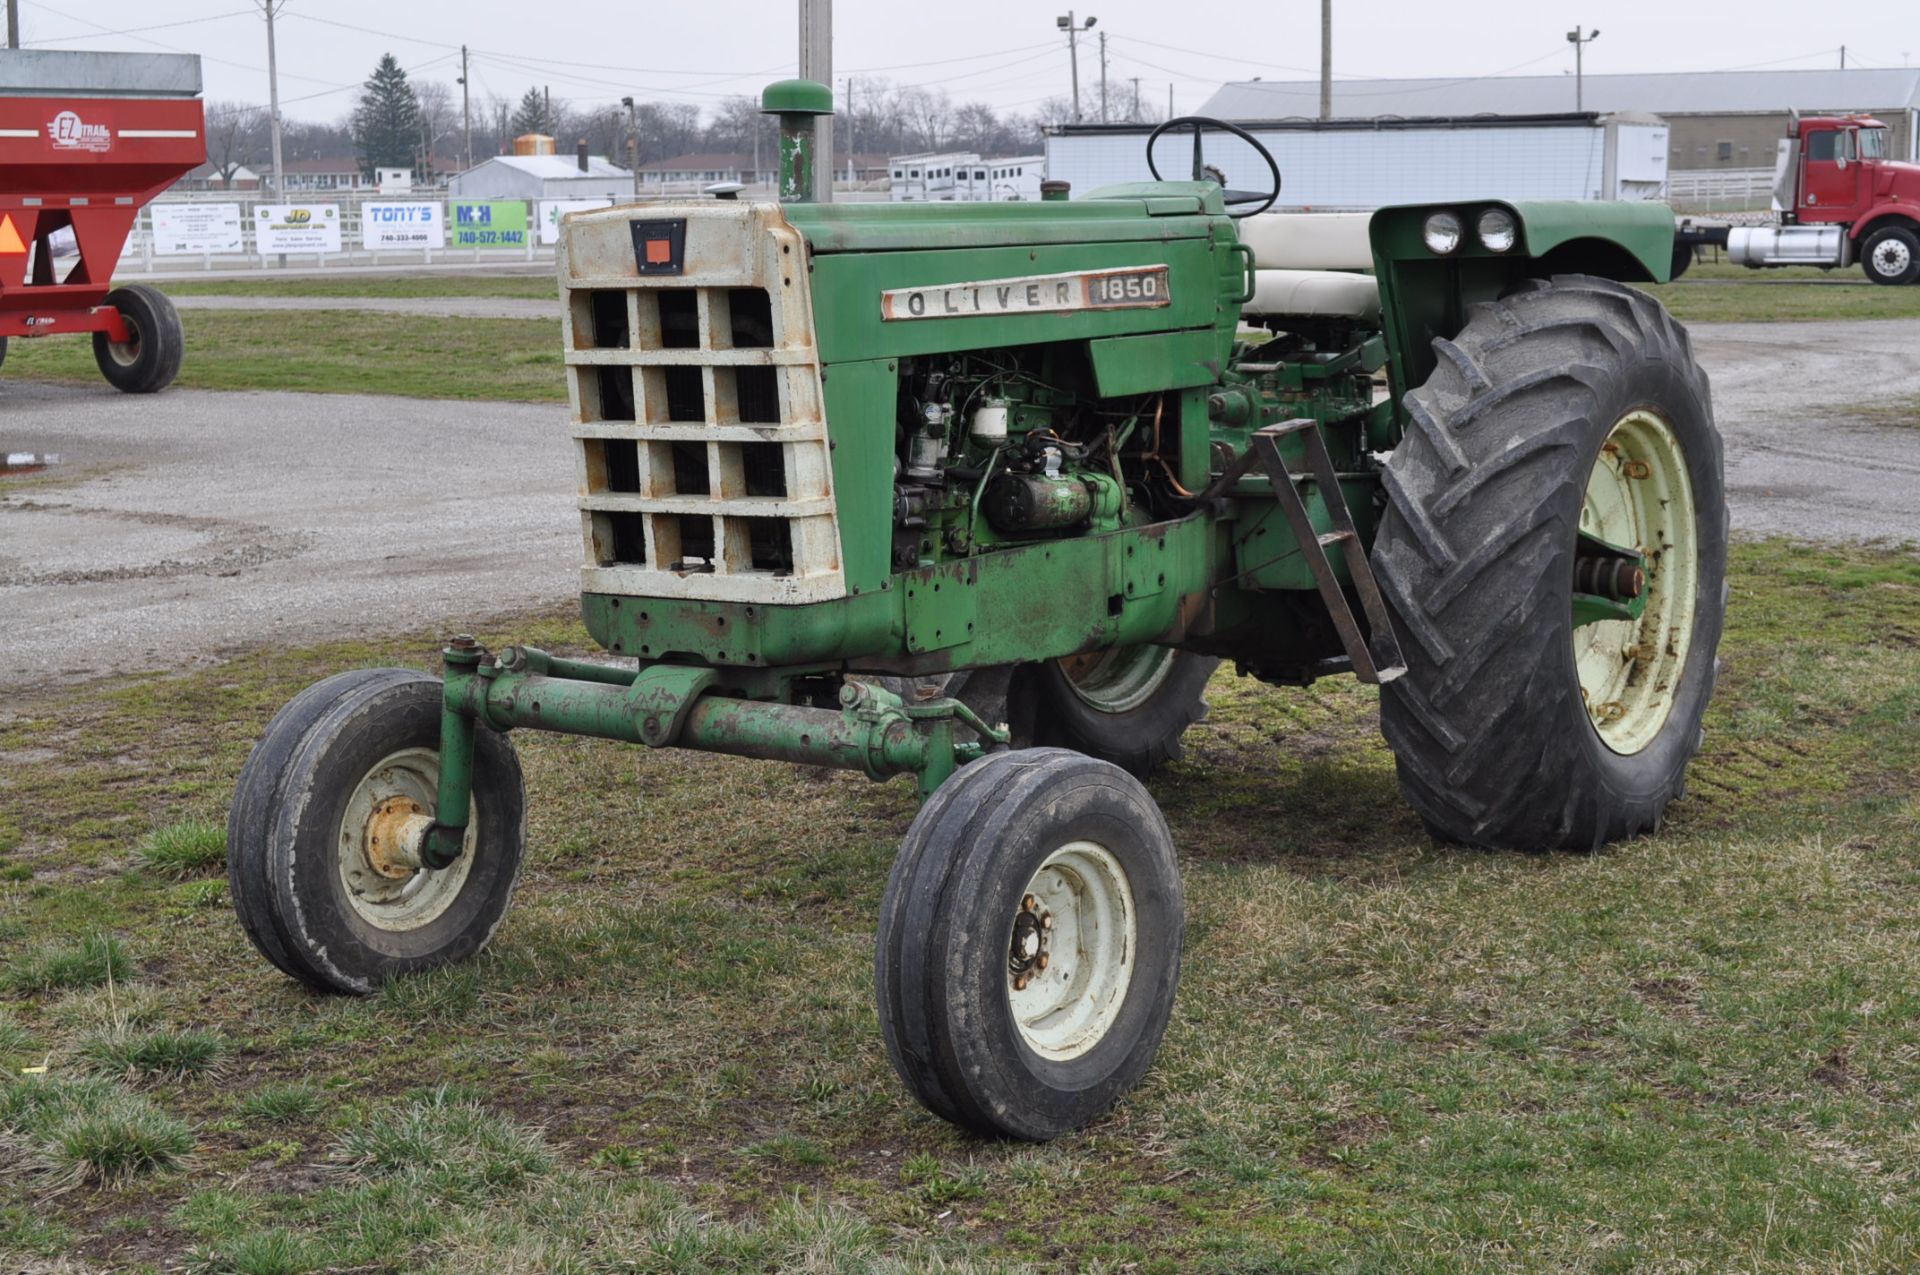 Oliver 1850 tractor, shows 4509 hours, diesel, wide front, 3pt, 540 pto, 1 remote, 9.5L-15 front,